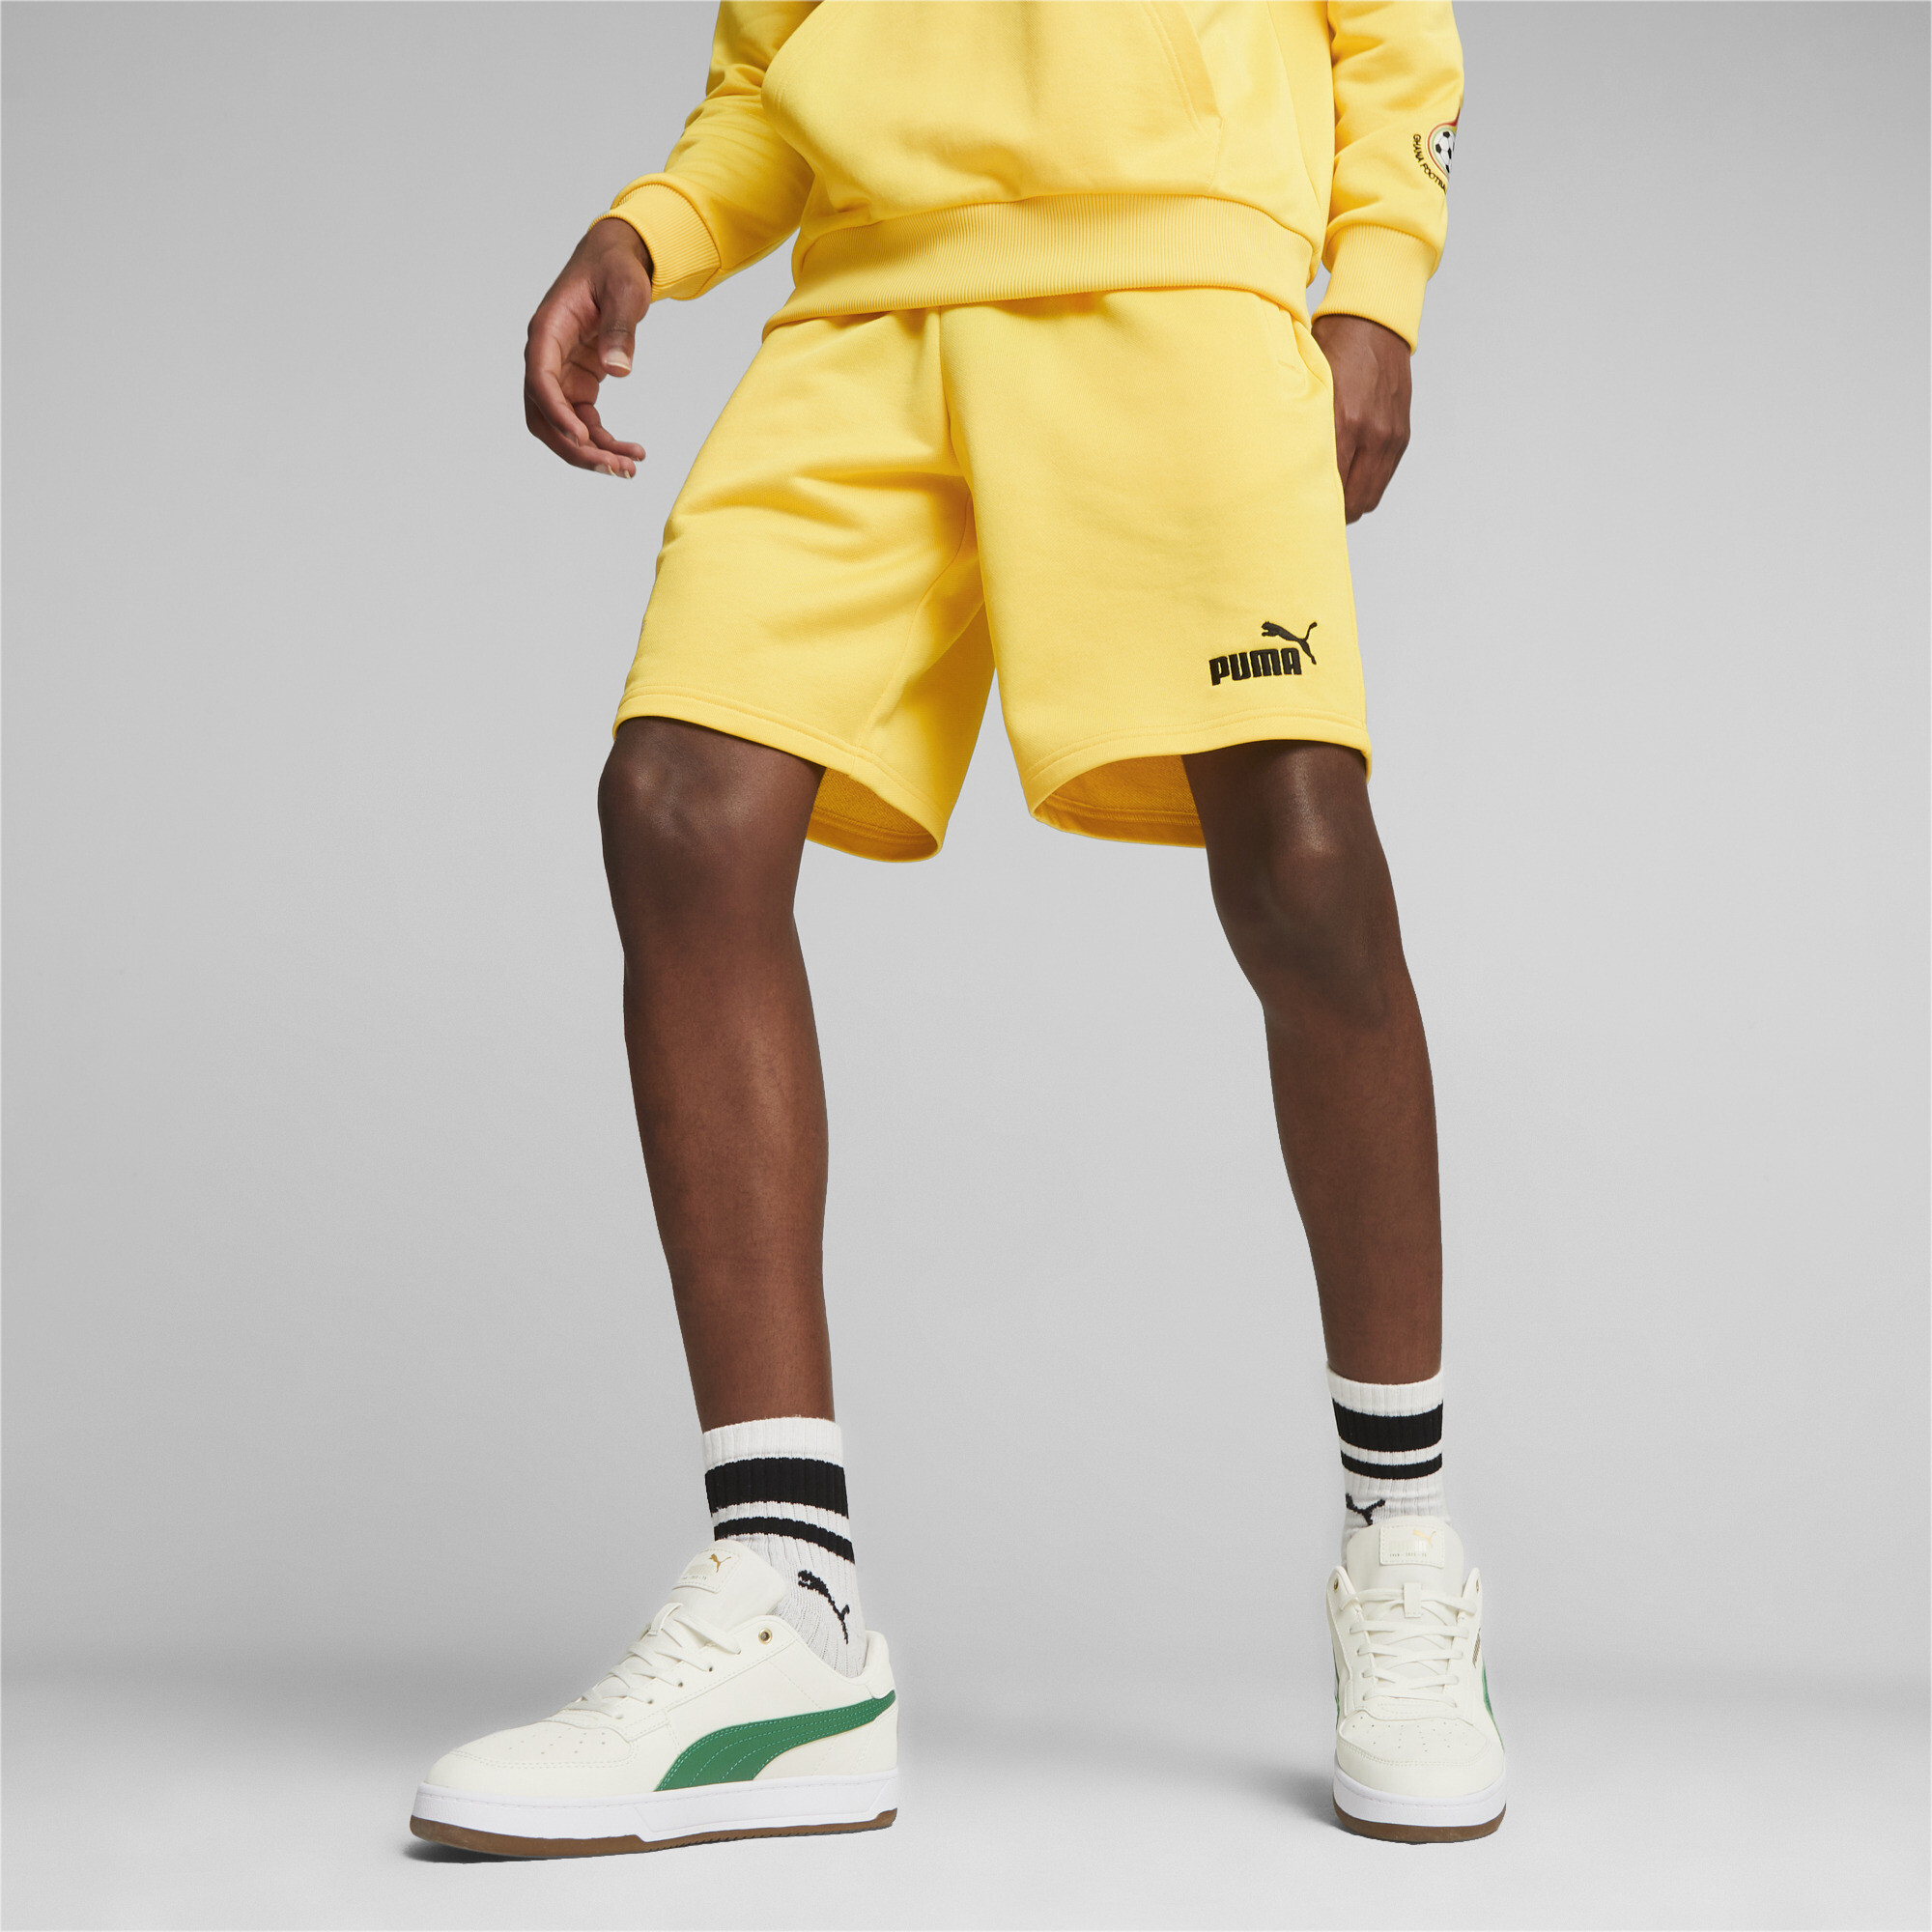 Men's Athletic Shorts in Yellow